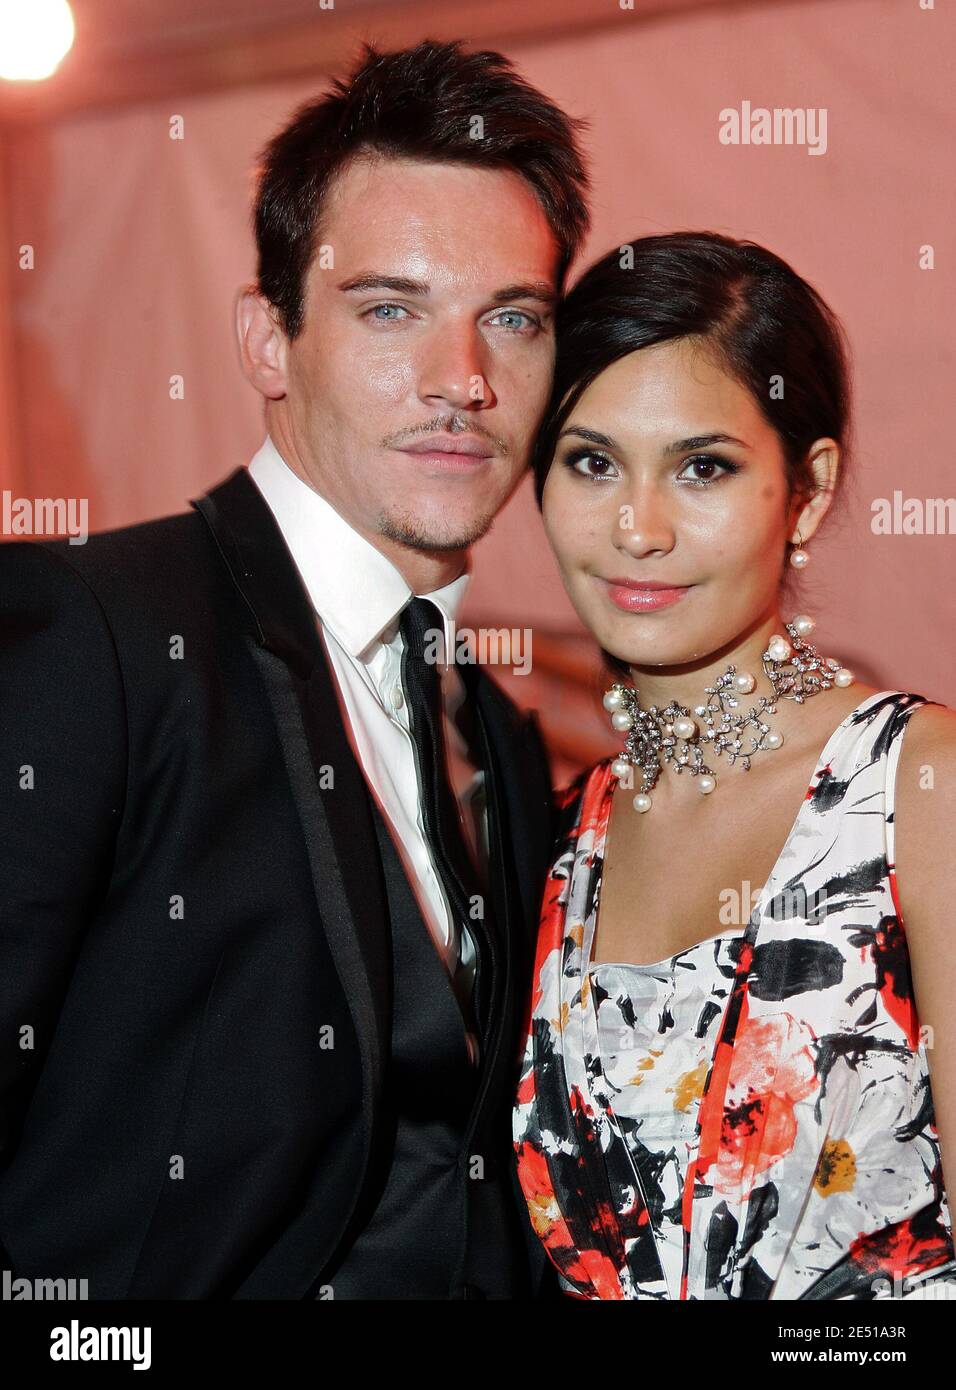 Jonathan Rhys Meyers and Reena Hammer leave the 2008 Costume Institute Gala celebrating the 'Superheroes: Fashion and Fantasy' exhibition held at the Metropolitan Museum of Art in New York City, USA on May 5, 2008. Photo by Charles Guerin/ABACAPRESS.COM Stock Photo